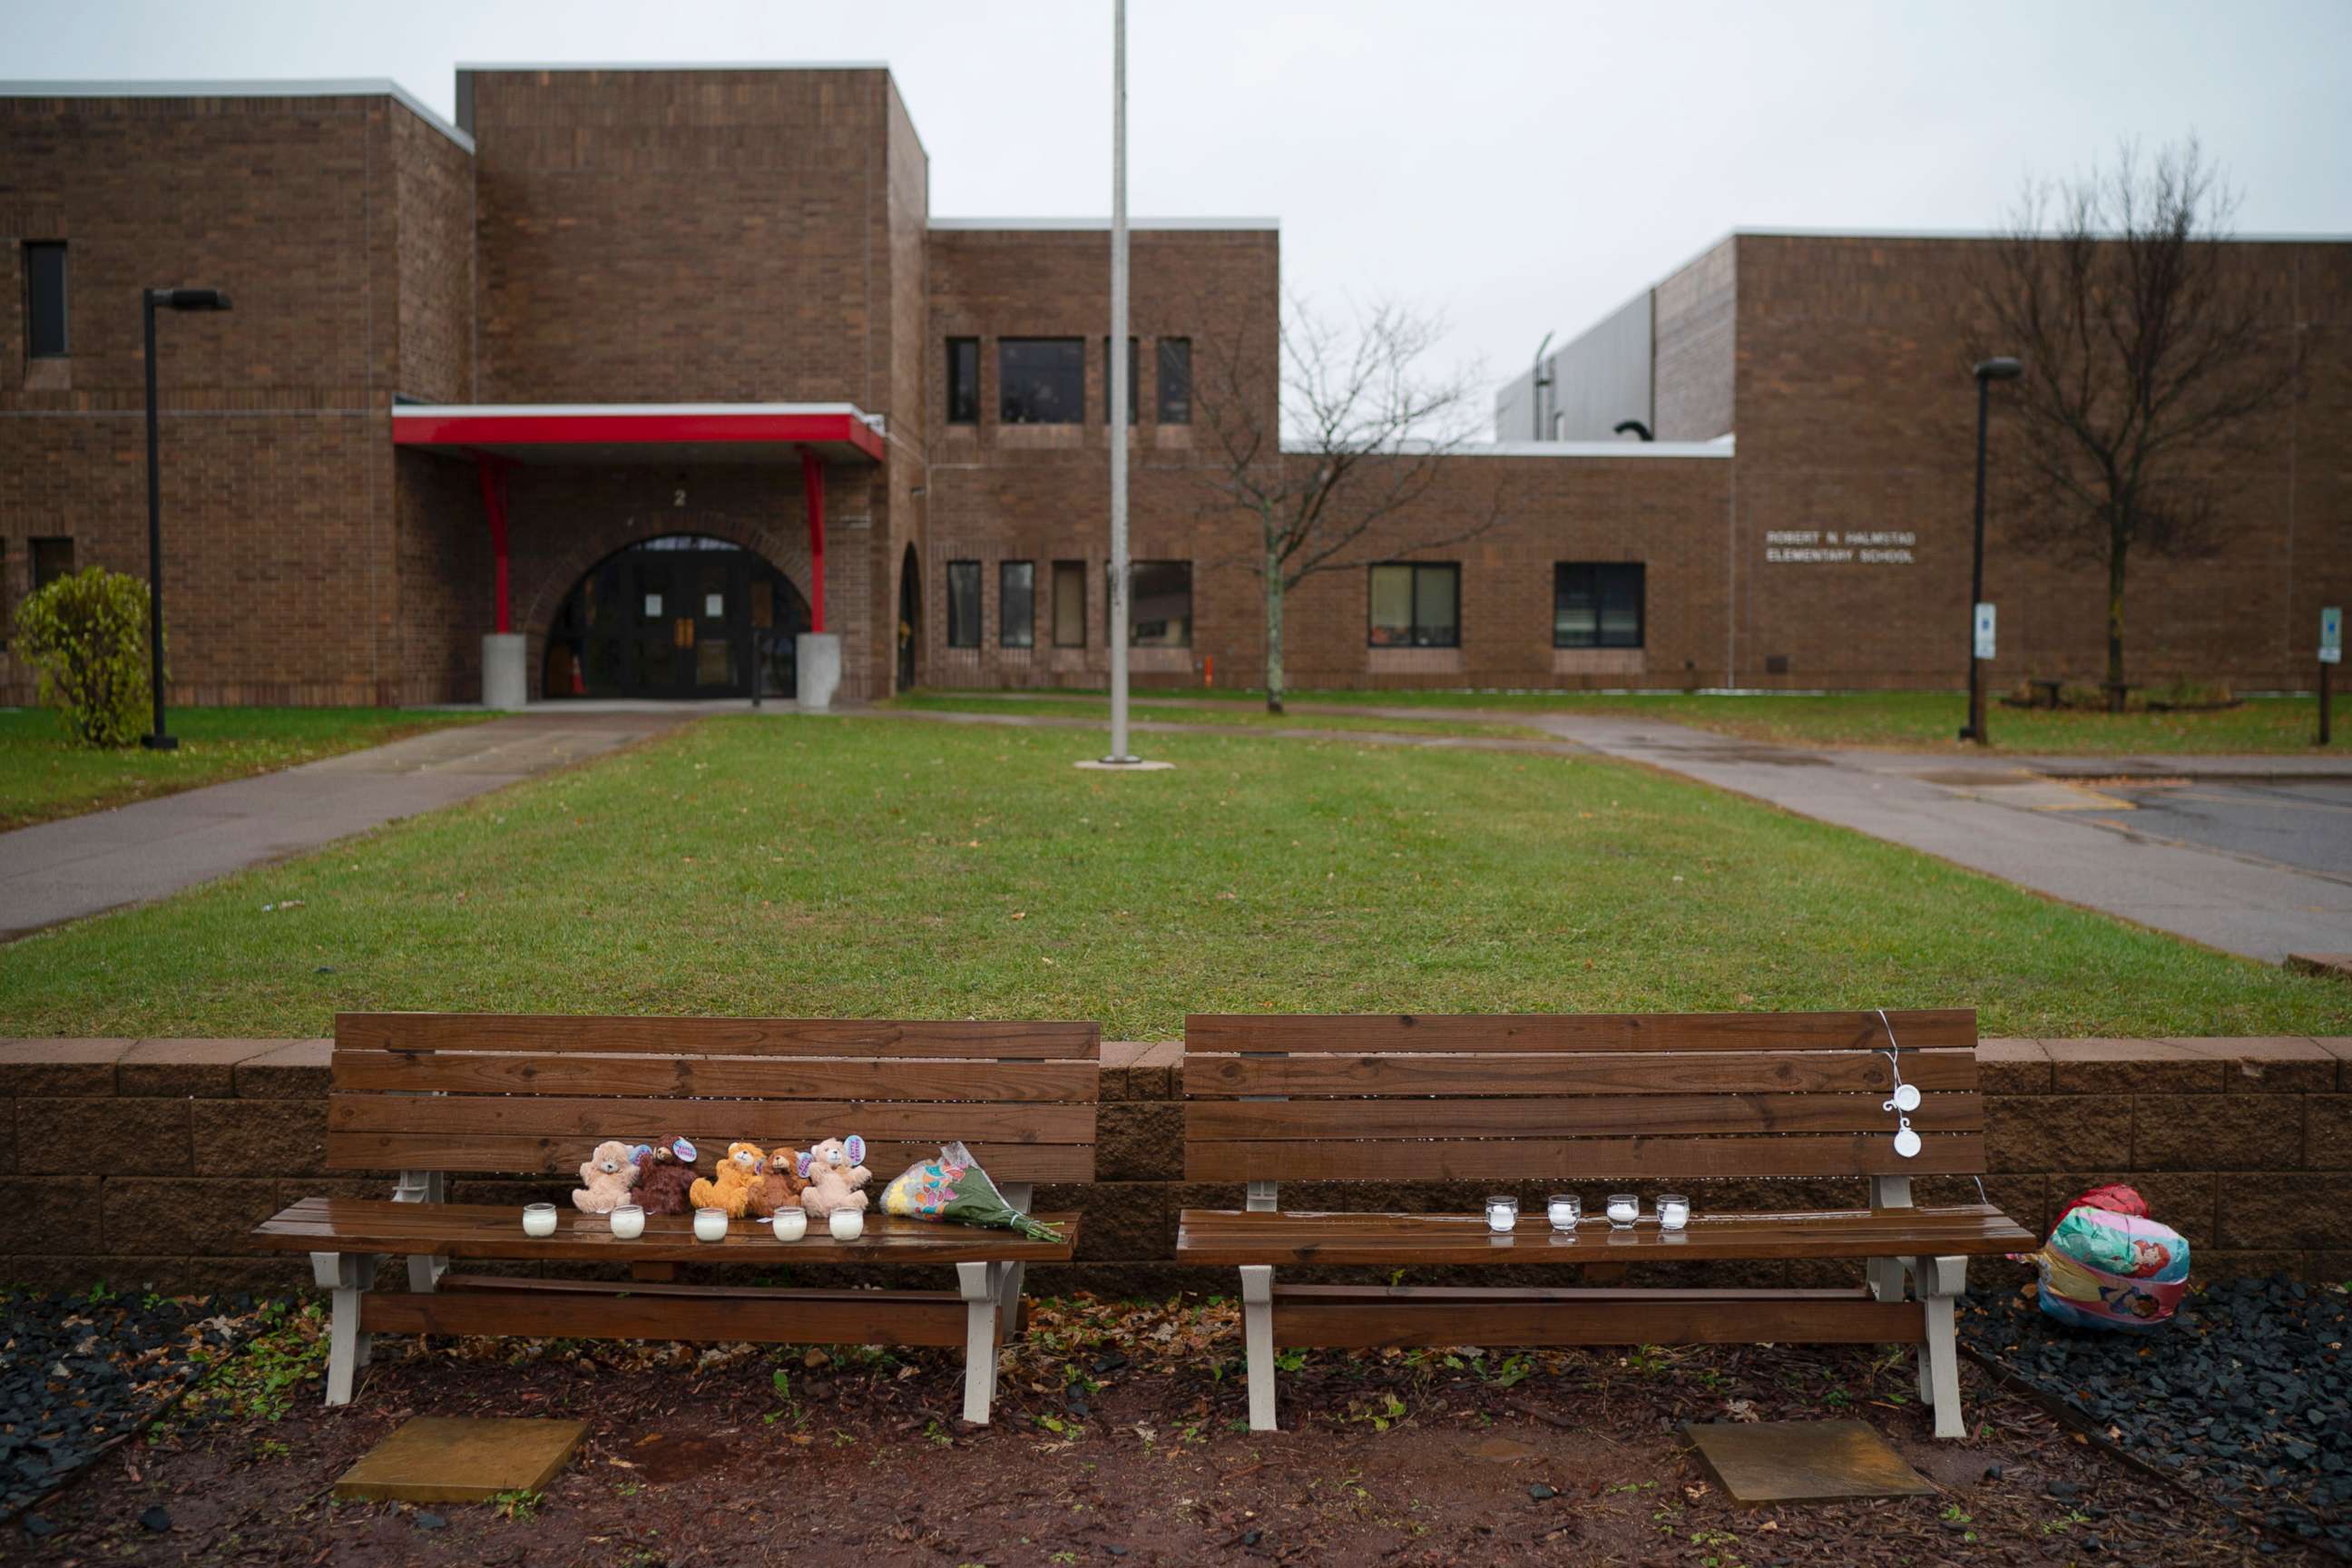 PHOTO: Teddy bears, flowers, and candles were placed on benches outside Halmstad Elementary School in Chippewa Falls, Wis. as a memorial to the three Girl Scouts who were struck and killed by a driver who fled the scene, Nov. 4, 2018.